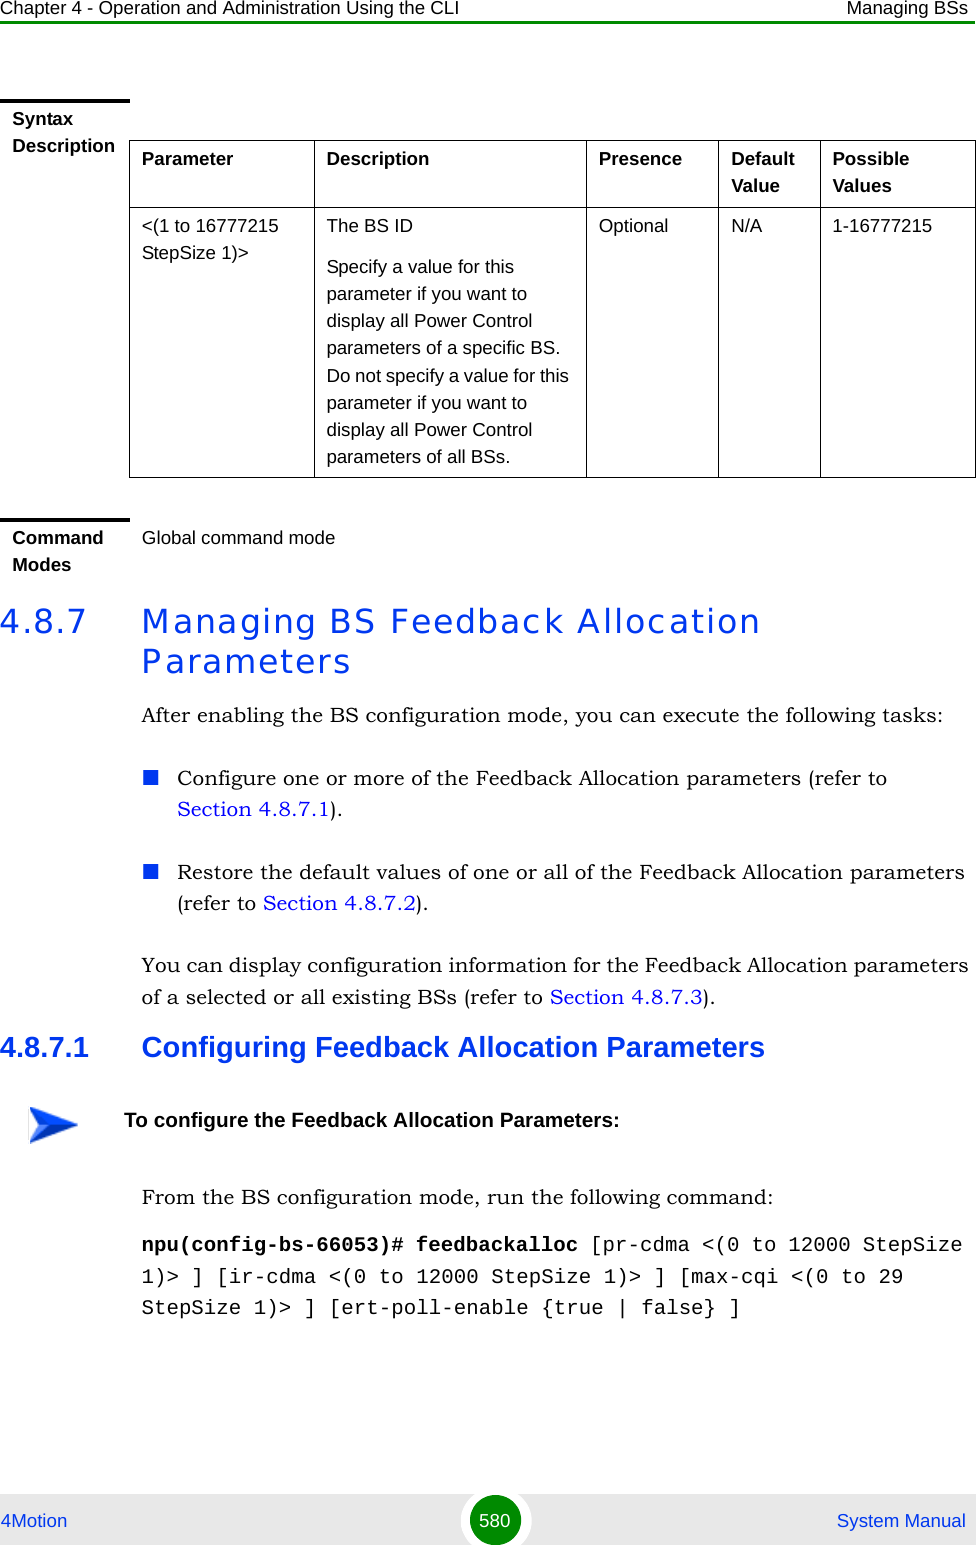 Chapter 4 - Operation and Administration Using the CLI Managing BSs4Motion 580  System Manual4.8.7 Managing BS Feedback Allocation ParametersAfter enabling the BS configuration mode, you can execute the following tasks:Configure one or more of the Feedback Allocation parameters (refer to Section 4.8.7.1).Restore the default values of one or all of the Feedback Allocation parameters (refer to Section 4.8.7.2).You can display configuration information for the Feedback Allocation parameters of a selected or all existing BSs (refer to Section 4.8.7.3).4.8.7.1 Configuring Feedback Allocation ParametersFrom the BS configuration mode, run the following command:npu(config-bs-66053)# feedbackalloc [pr-cdma &lt;(0 to 12000 StepSize 1)&gt; ] [ir-cdma &lt;(0 to 12000 StepSize 1)&gt; ] [max-cqi &lt;(0 to 29 StepSize 1)&gt; ] [ert-poll-enable {true | false} ]Syntax Description Parameter Description Presence Default ValuePossible Values&lt;(1 to 16777215 StepSize 1)&gt;The BS ID Specify a value for this parameter if you want to display all Power Control parameters of a specific BS. Do not specify a value for this parameter if you want to display all Power Control parameters of all BSs.Optional N/A 1-16777215Command ModesGlobal command modeTo configure the Feedback Allocation Parameters: